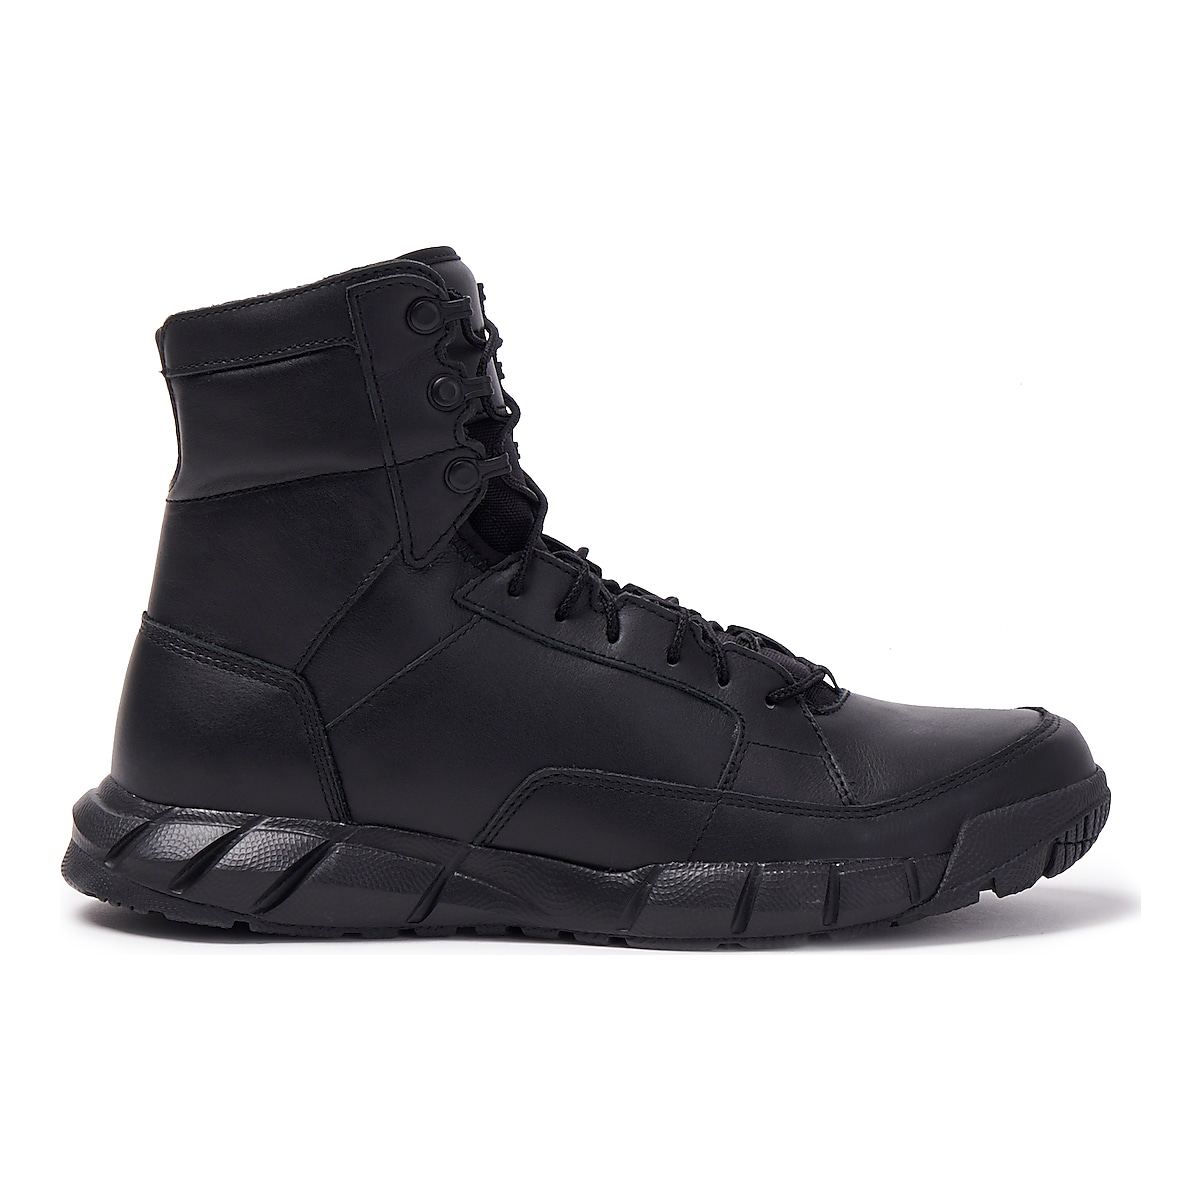 COMBAT BOOTS WISH LIST FAVES